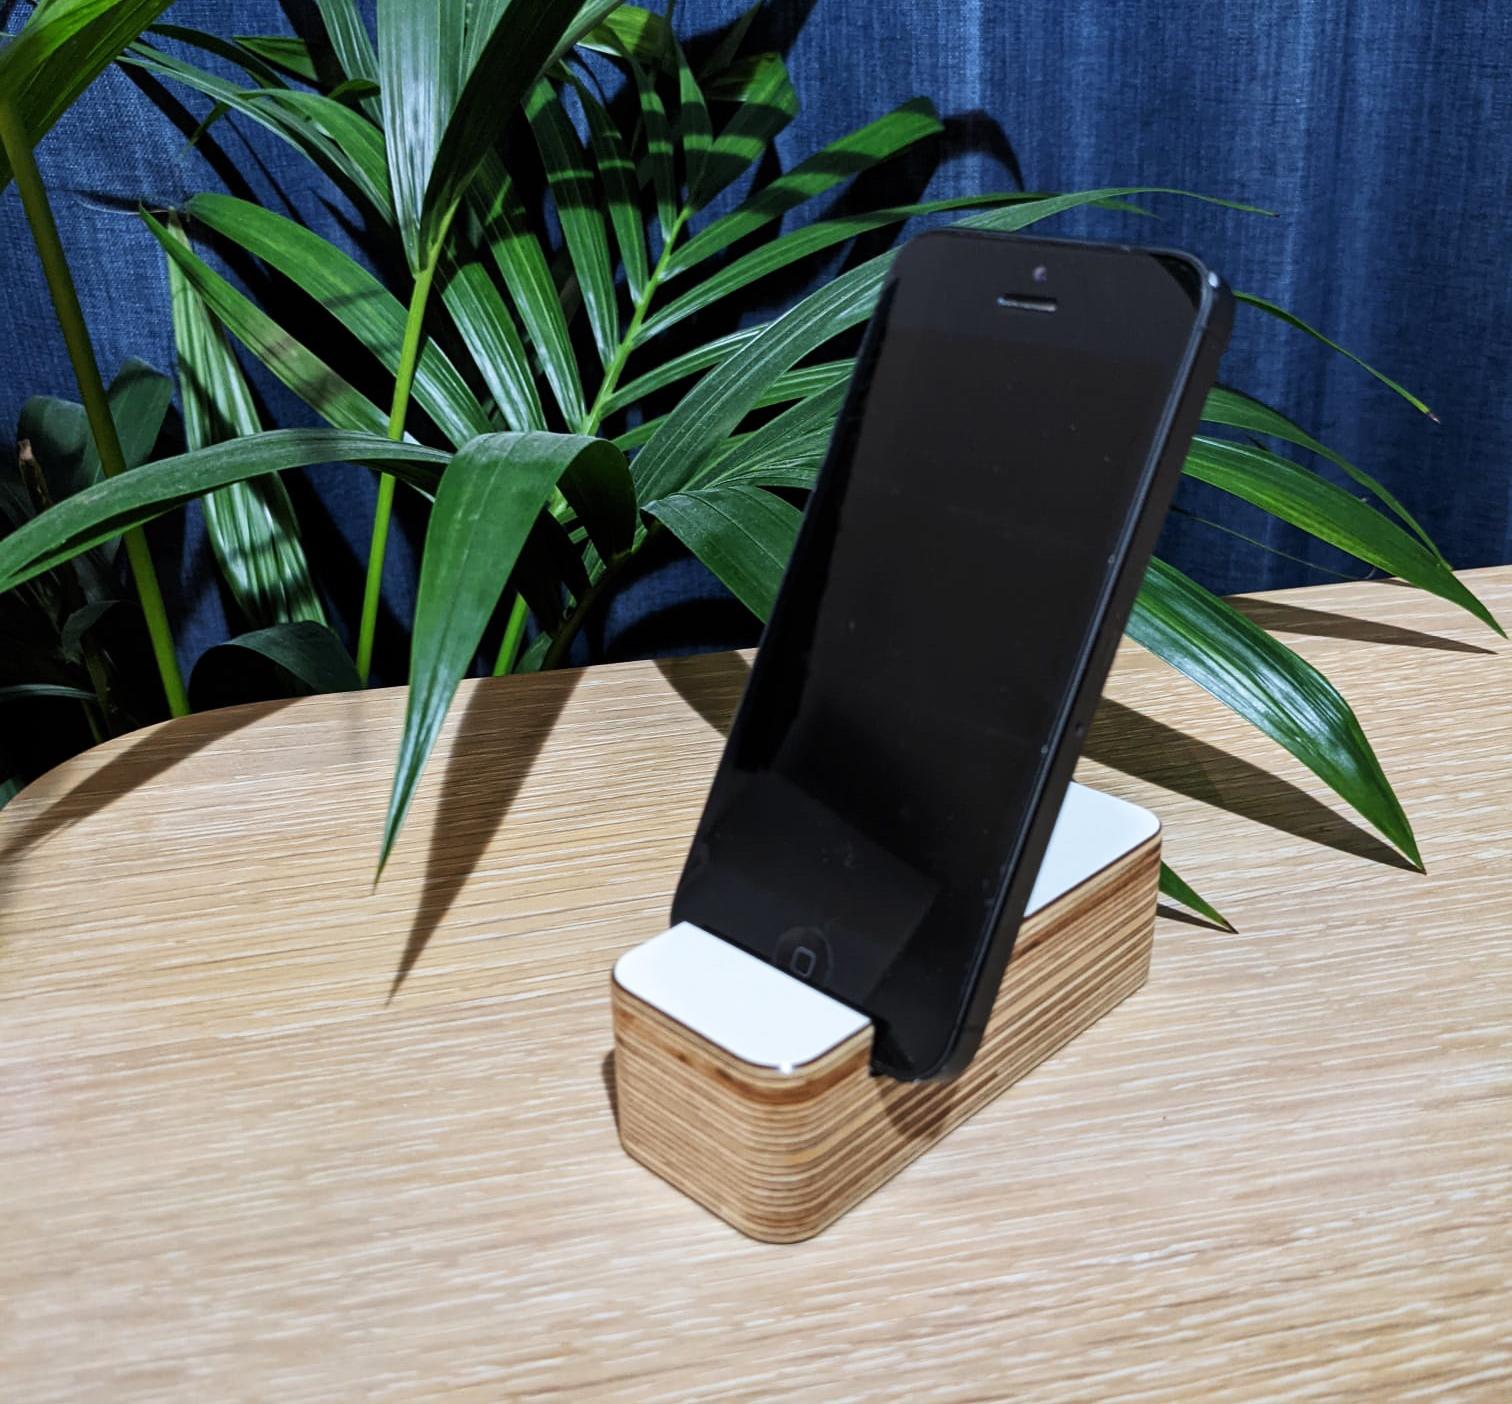 WEAMO Mobile Phone Stand Block A - Front Plant